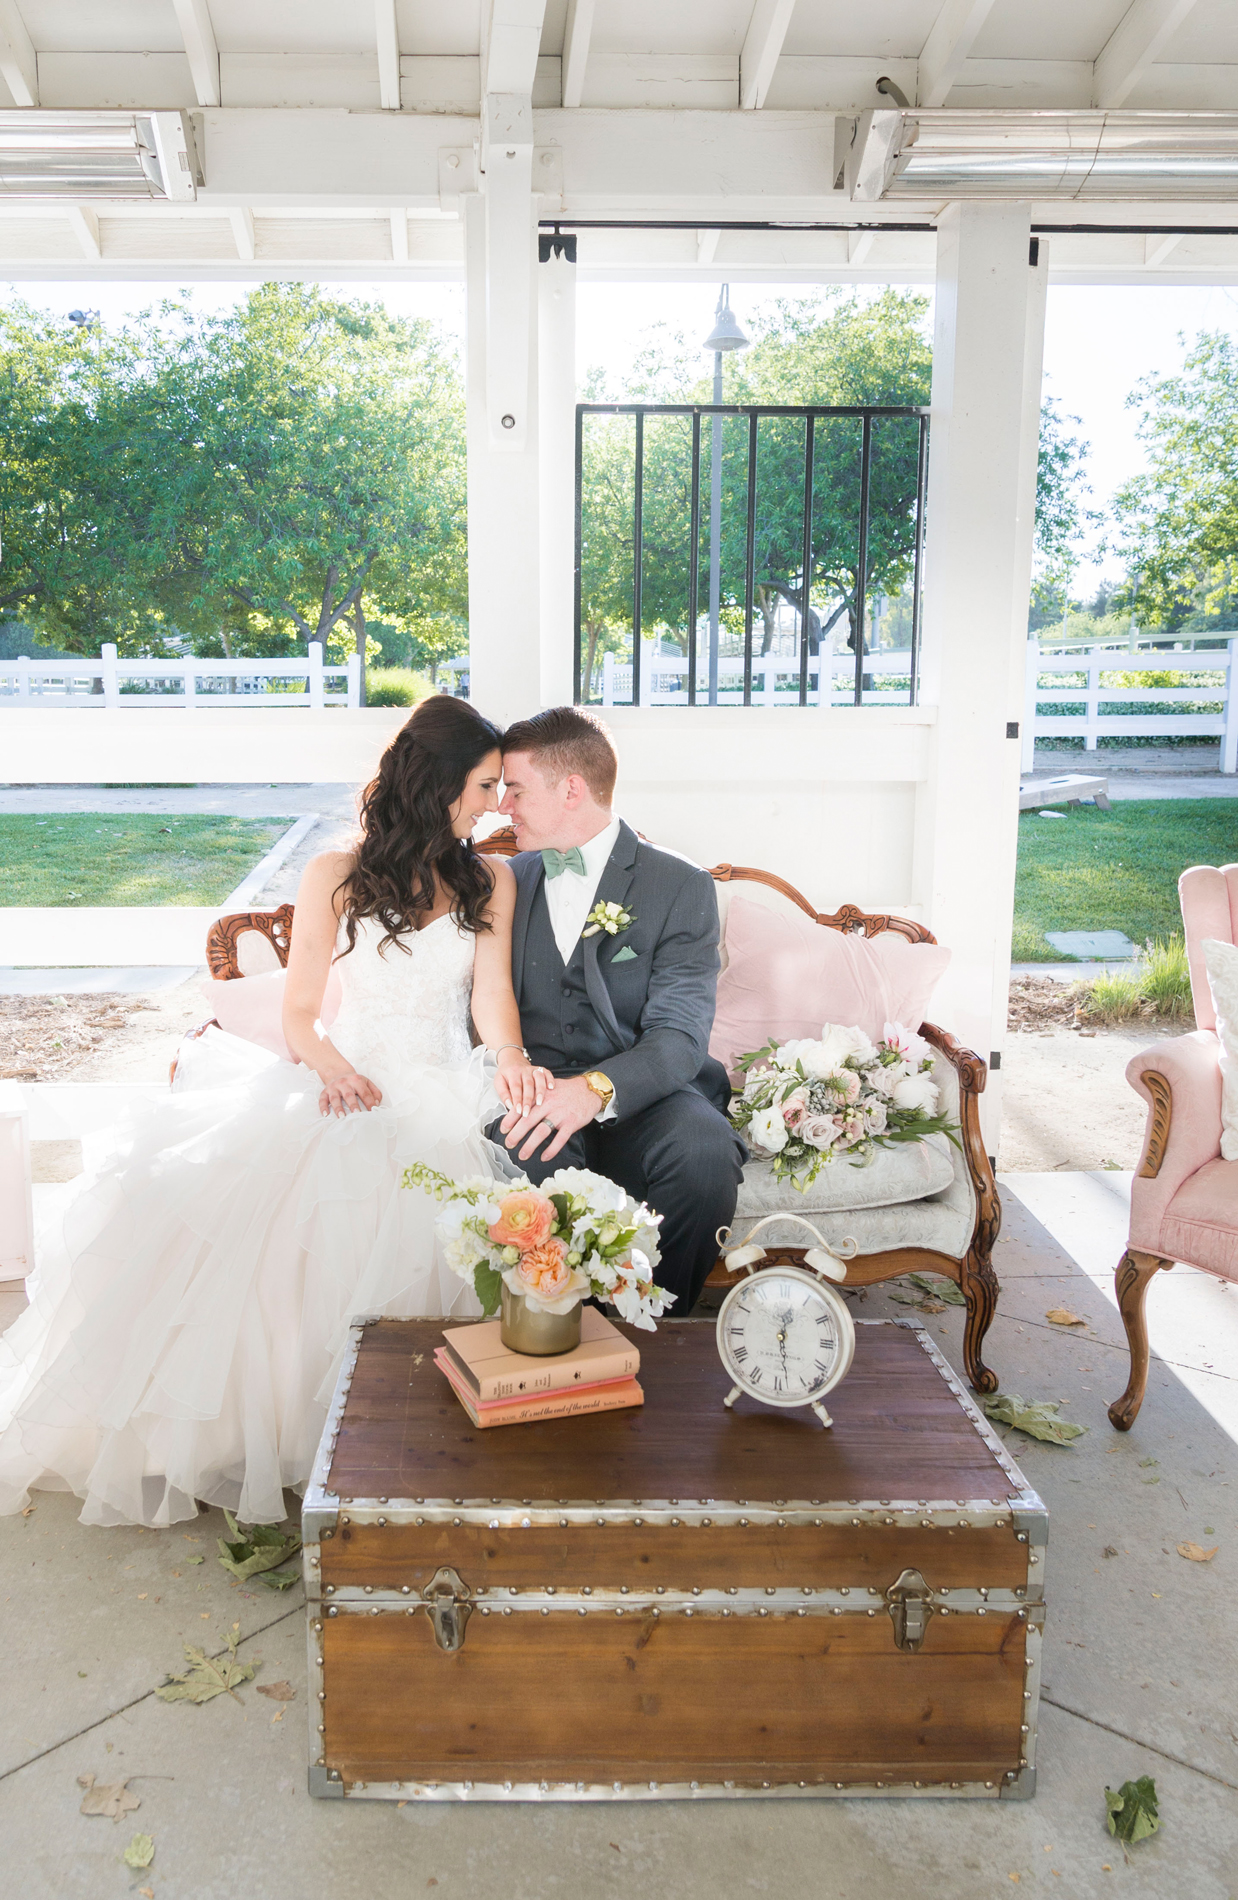 A Rustic-Vintage Glam McCoy Equestrian Center Wedding - Peterson Design & Photography